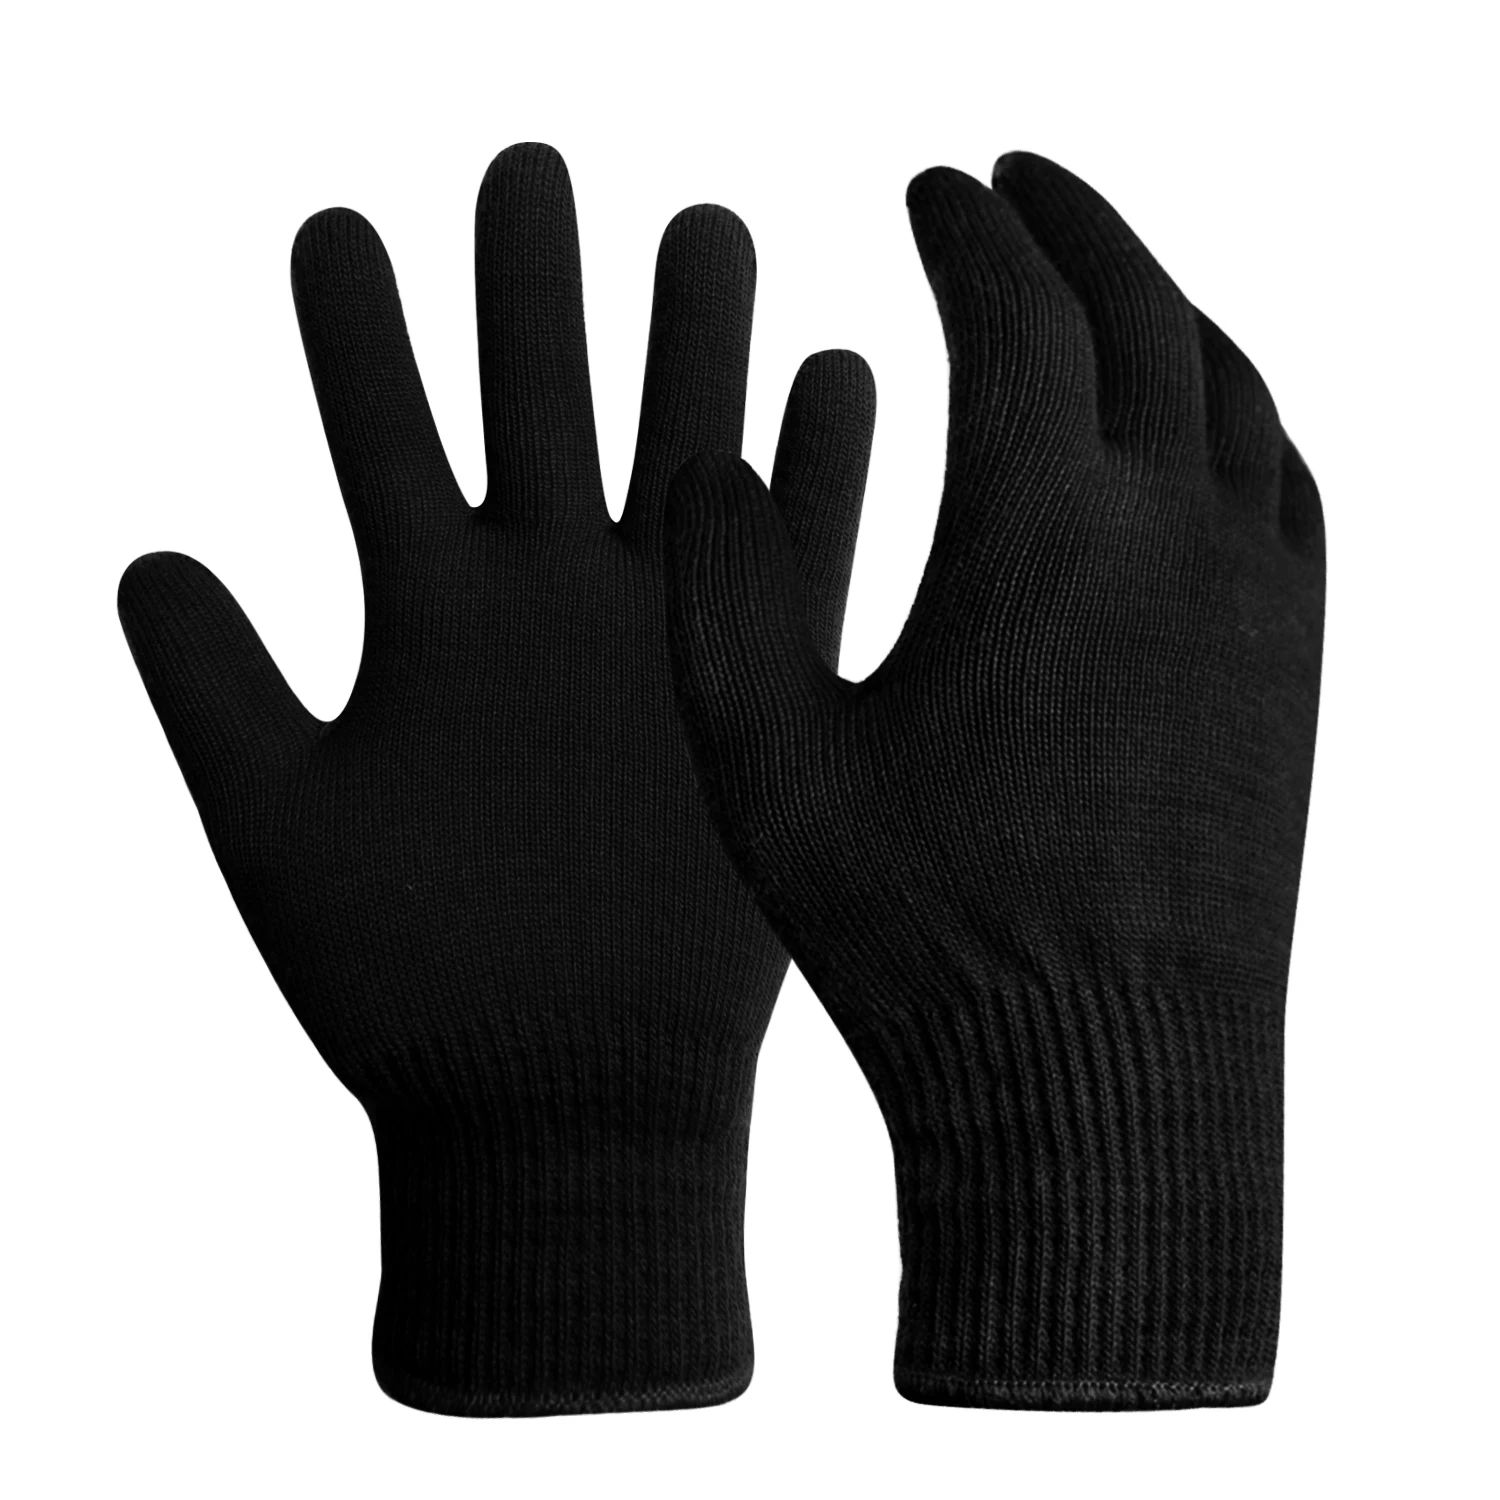 Skiing Snowboarding Cycling Running Keeping Warm String Knit Merino Wool Liner Gloves with Factory Customization